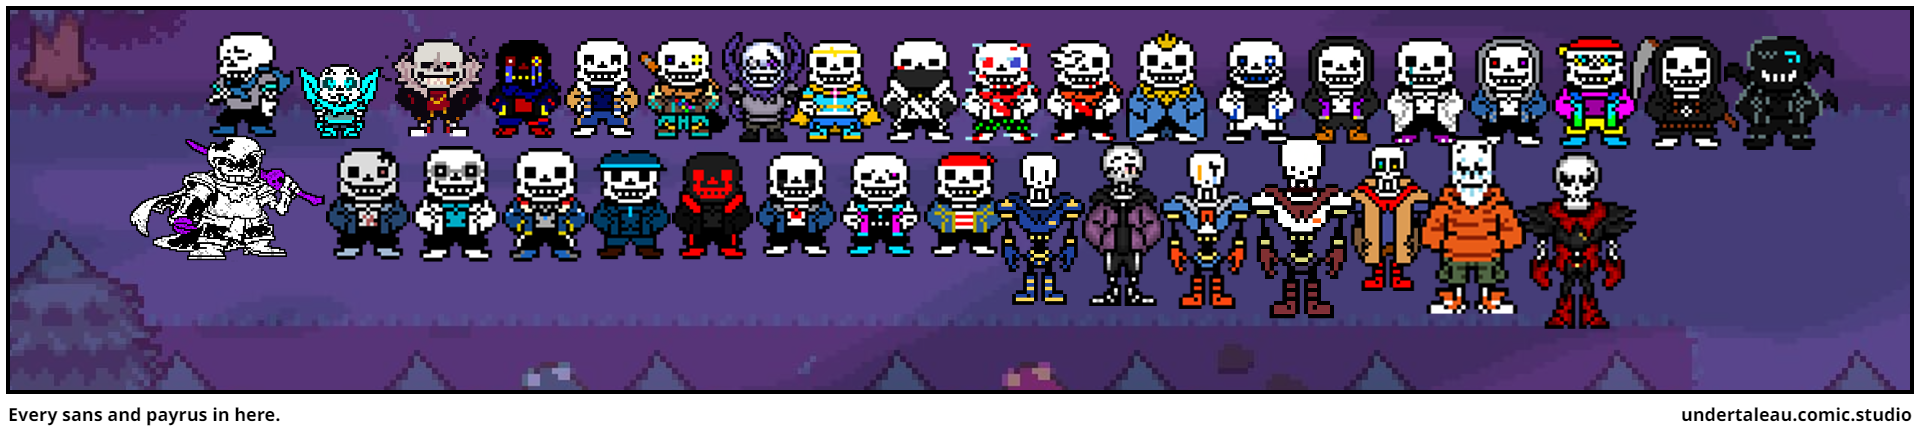 Every sans and payrus in here.